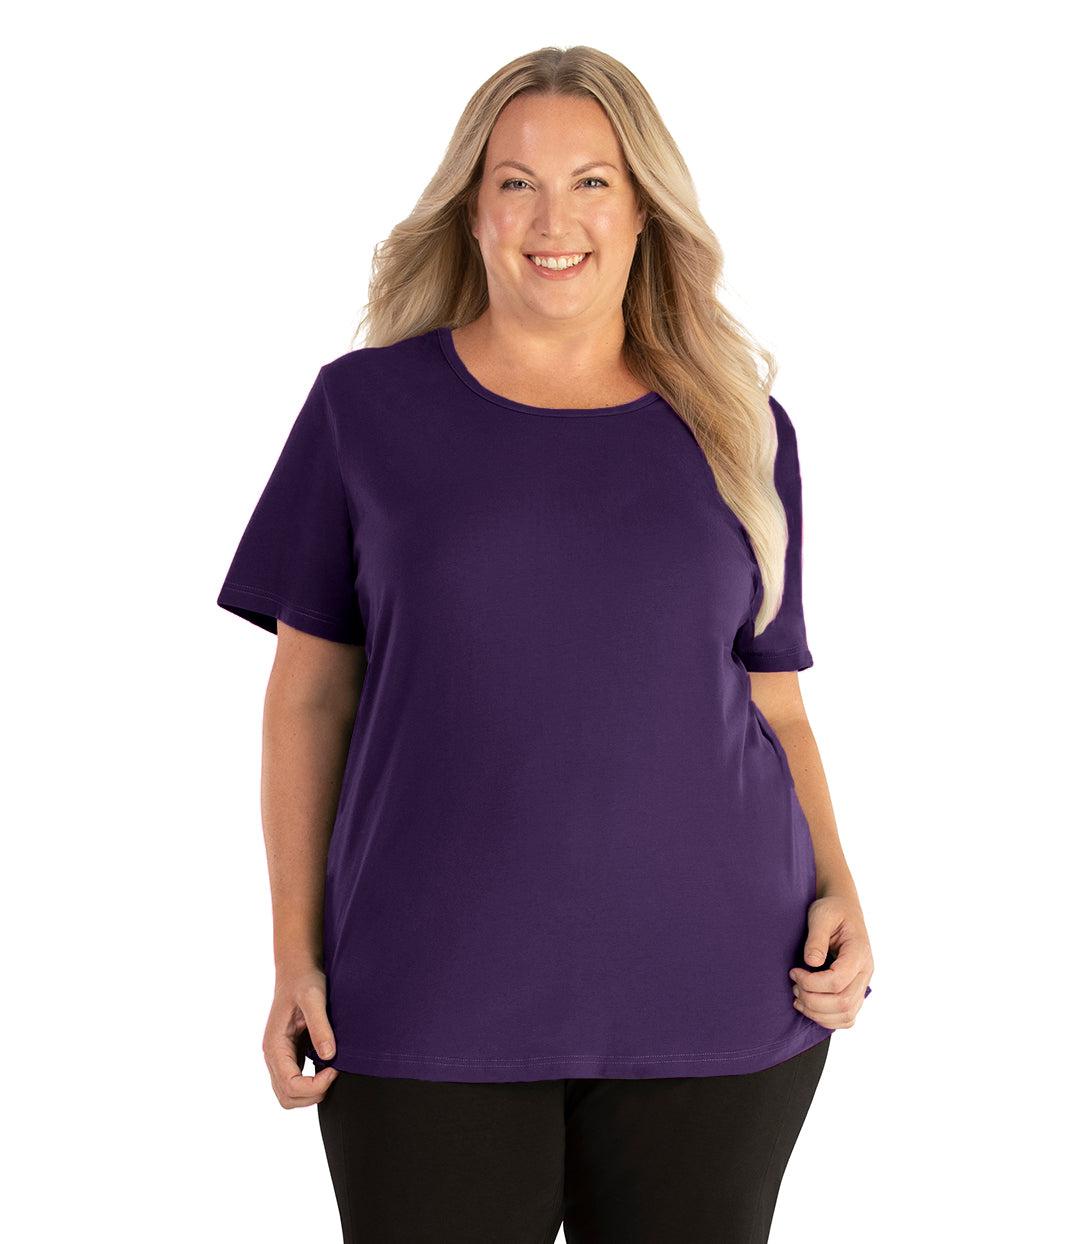 Plus size woman, facing front, wearing JunoActive plus size Stretch Naturals Lite Short Sleeve Scoop Neck Top in the color deep plum. She is wearing JunoActive Plus Size Leggings in the color black.